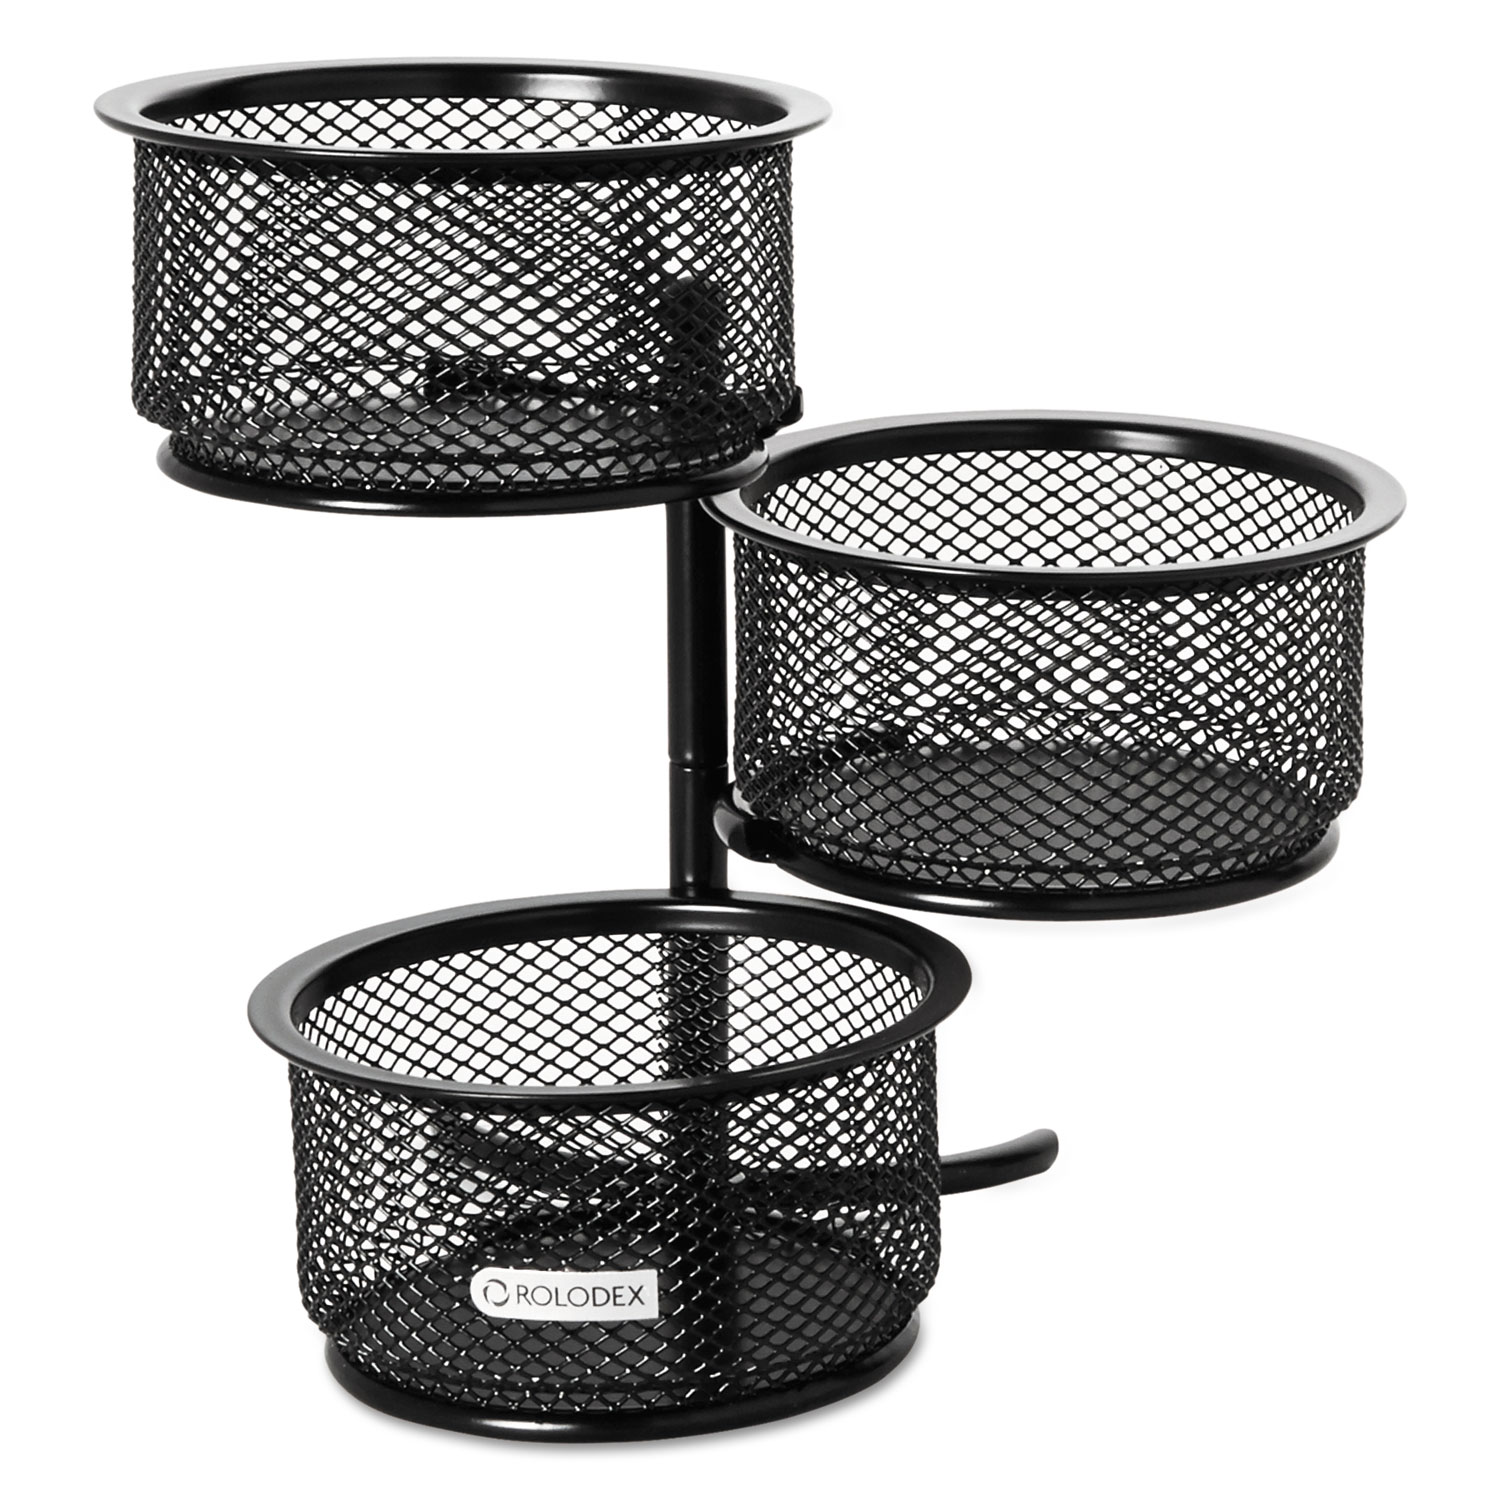 Rol62533 Rolodex 3 Tier Wire Mesh Swivel Tower Paper Clip Hold